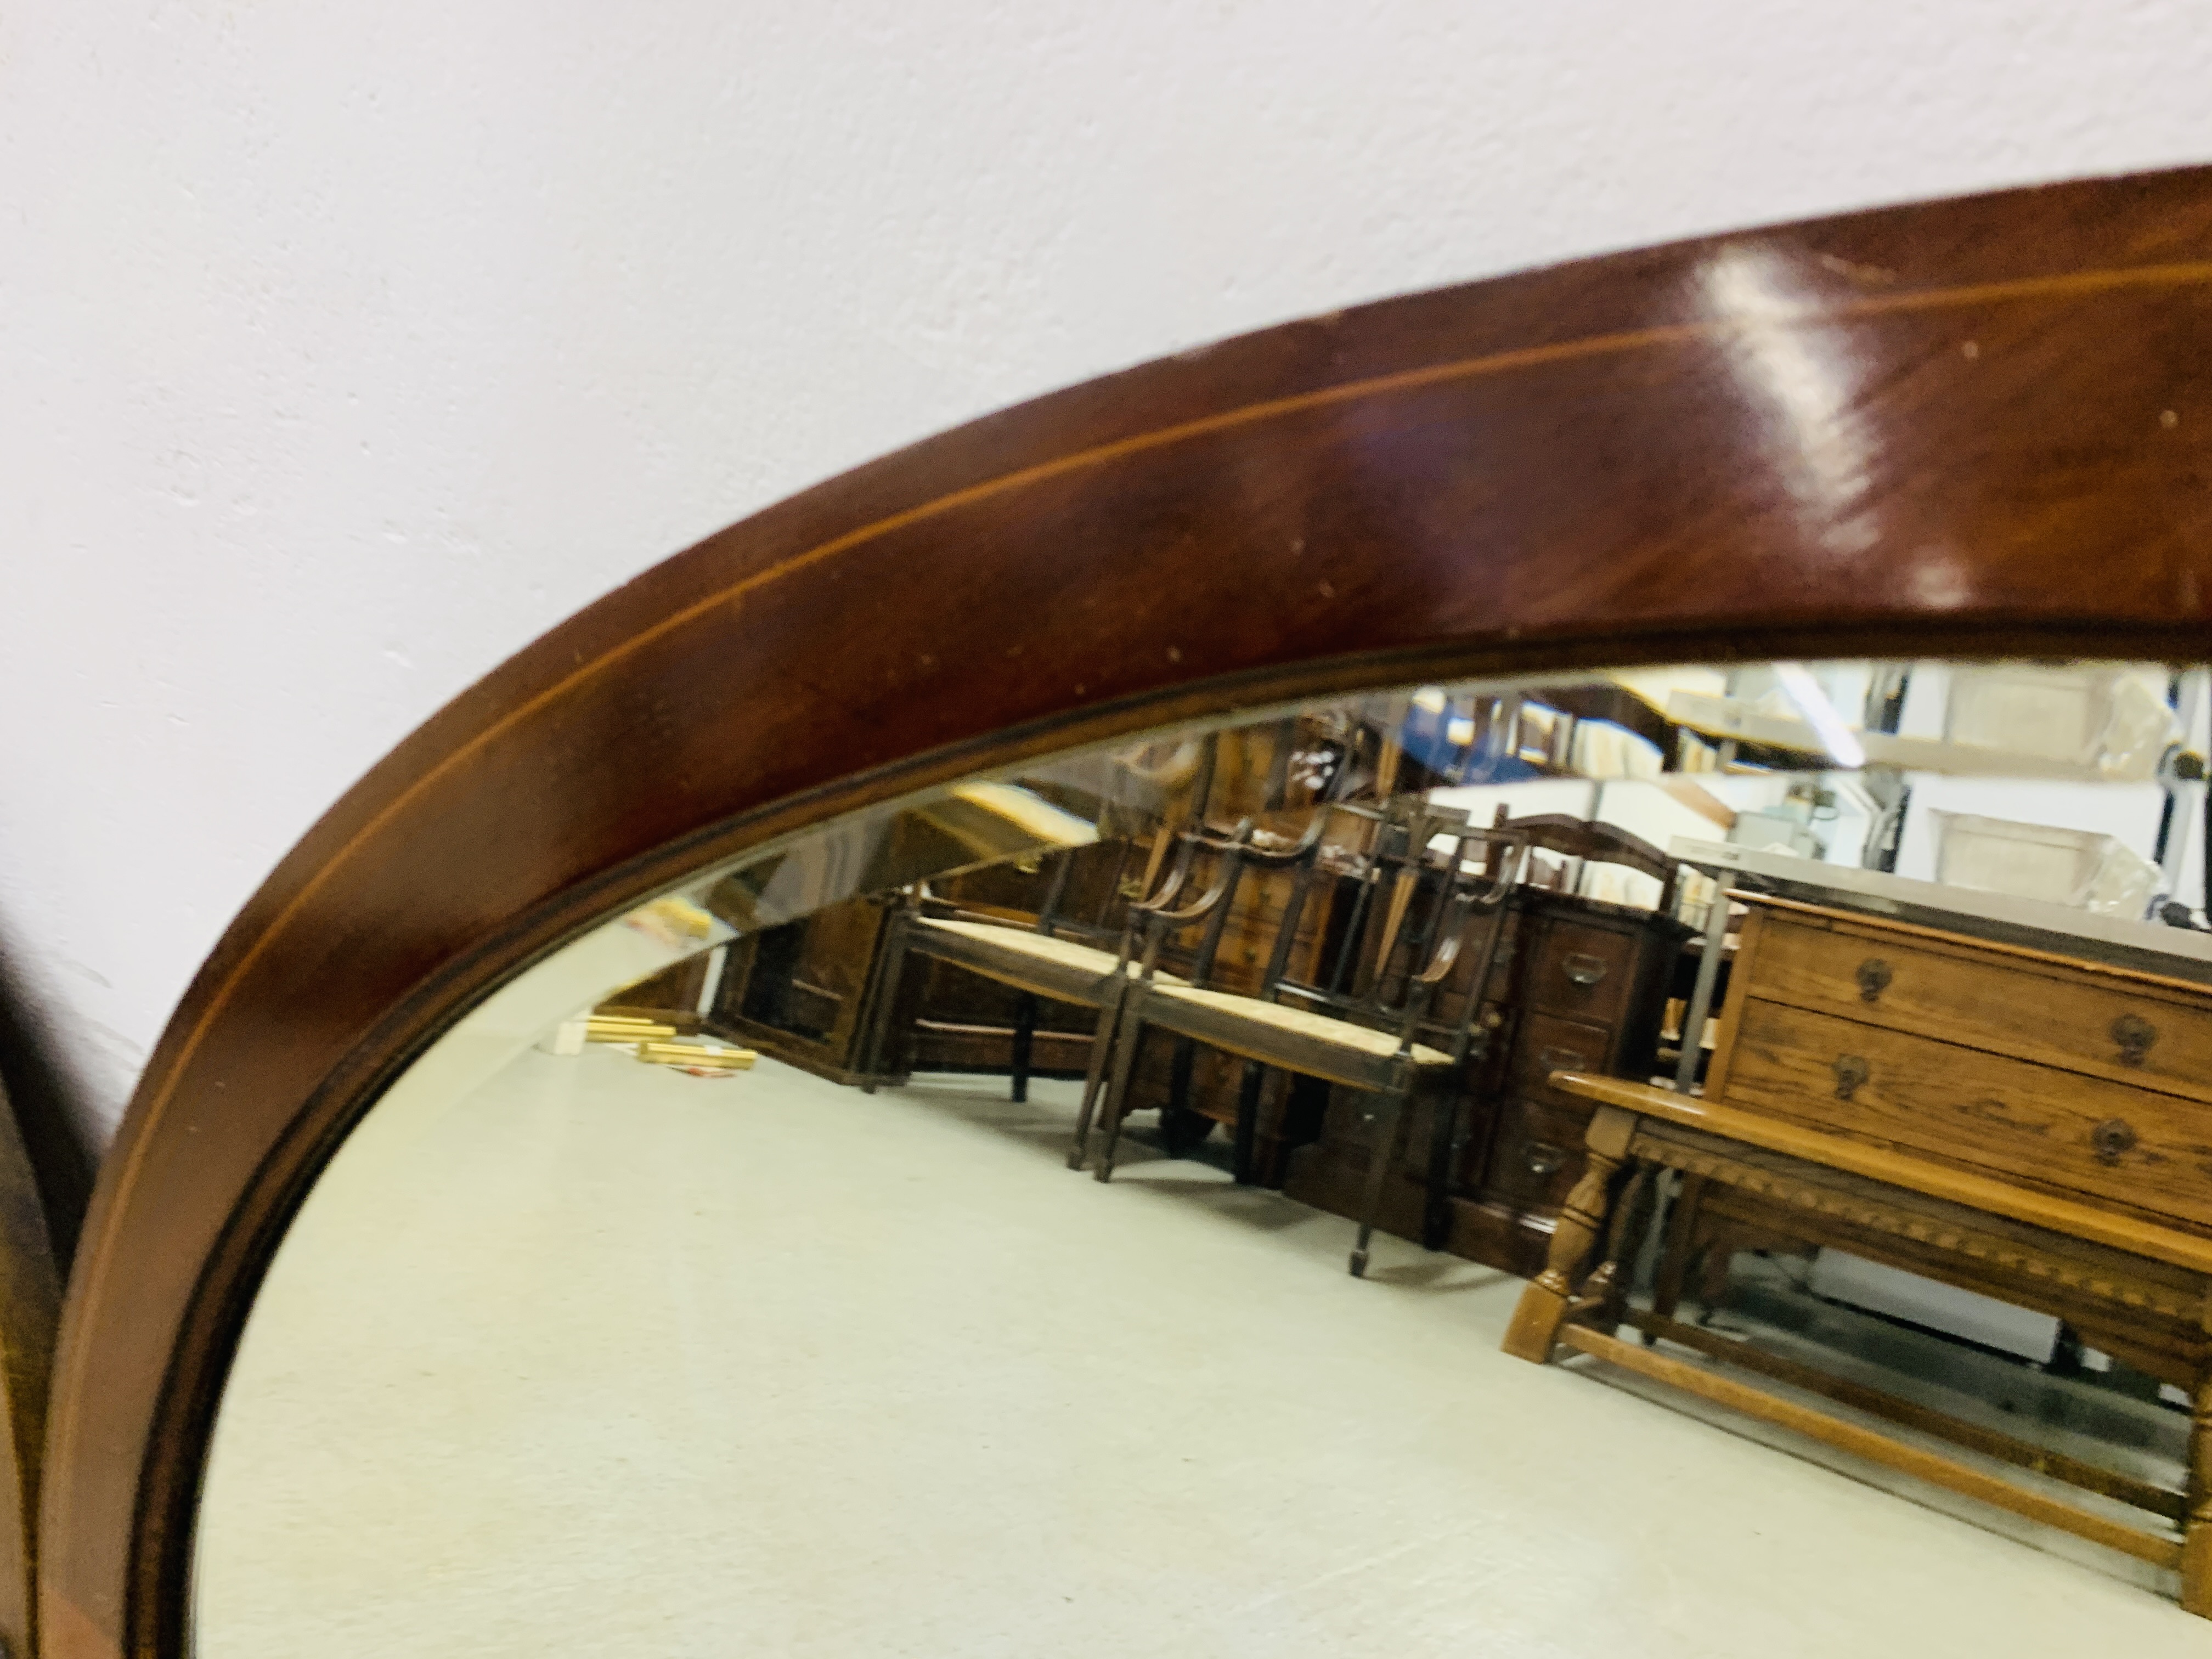 2 X VINTAGE MAHOGANY FRAMED OVAL BEVEL PLATE WALL MIRRORS ALONG WITH AN OVAL OAK FRAMED BEVEL PLATE - Image 7 of 7